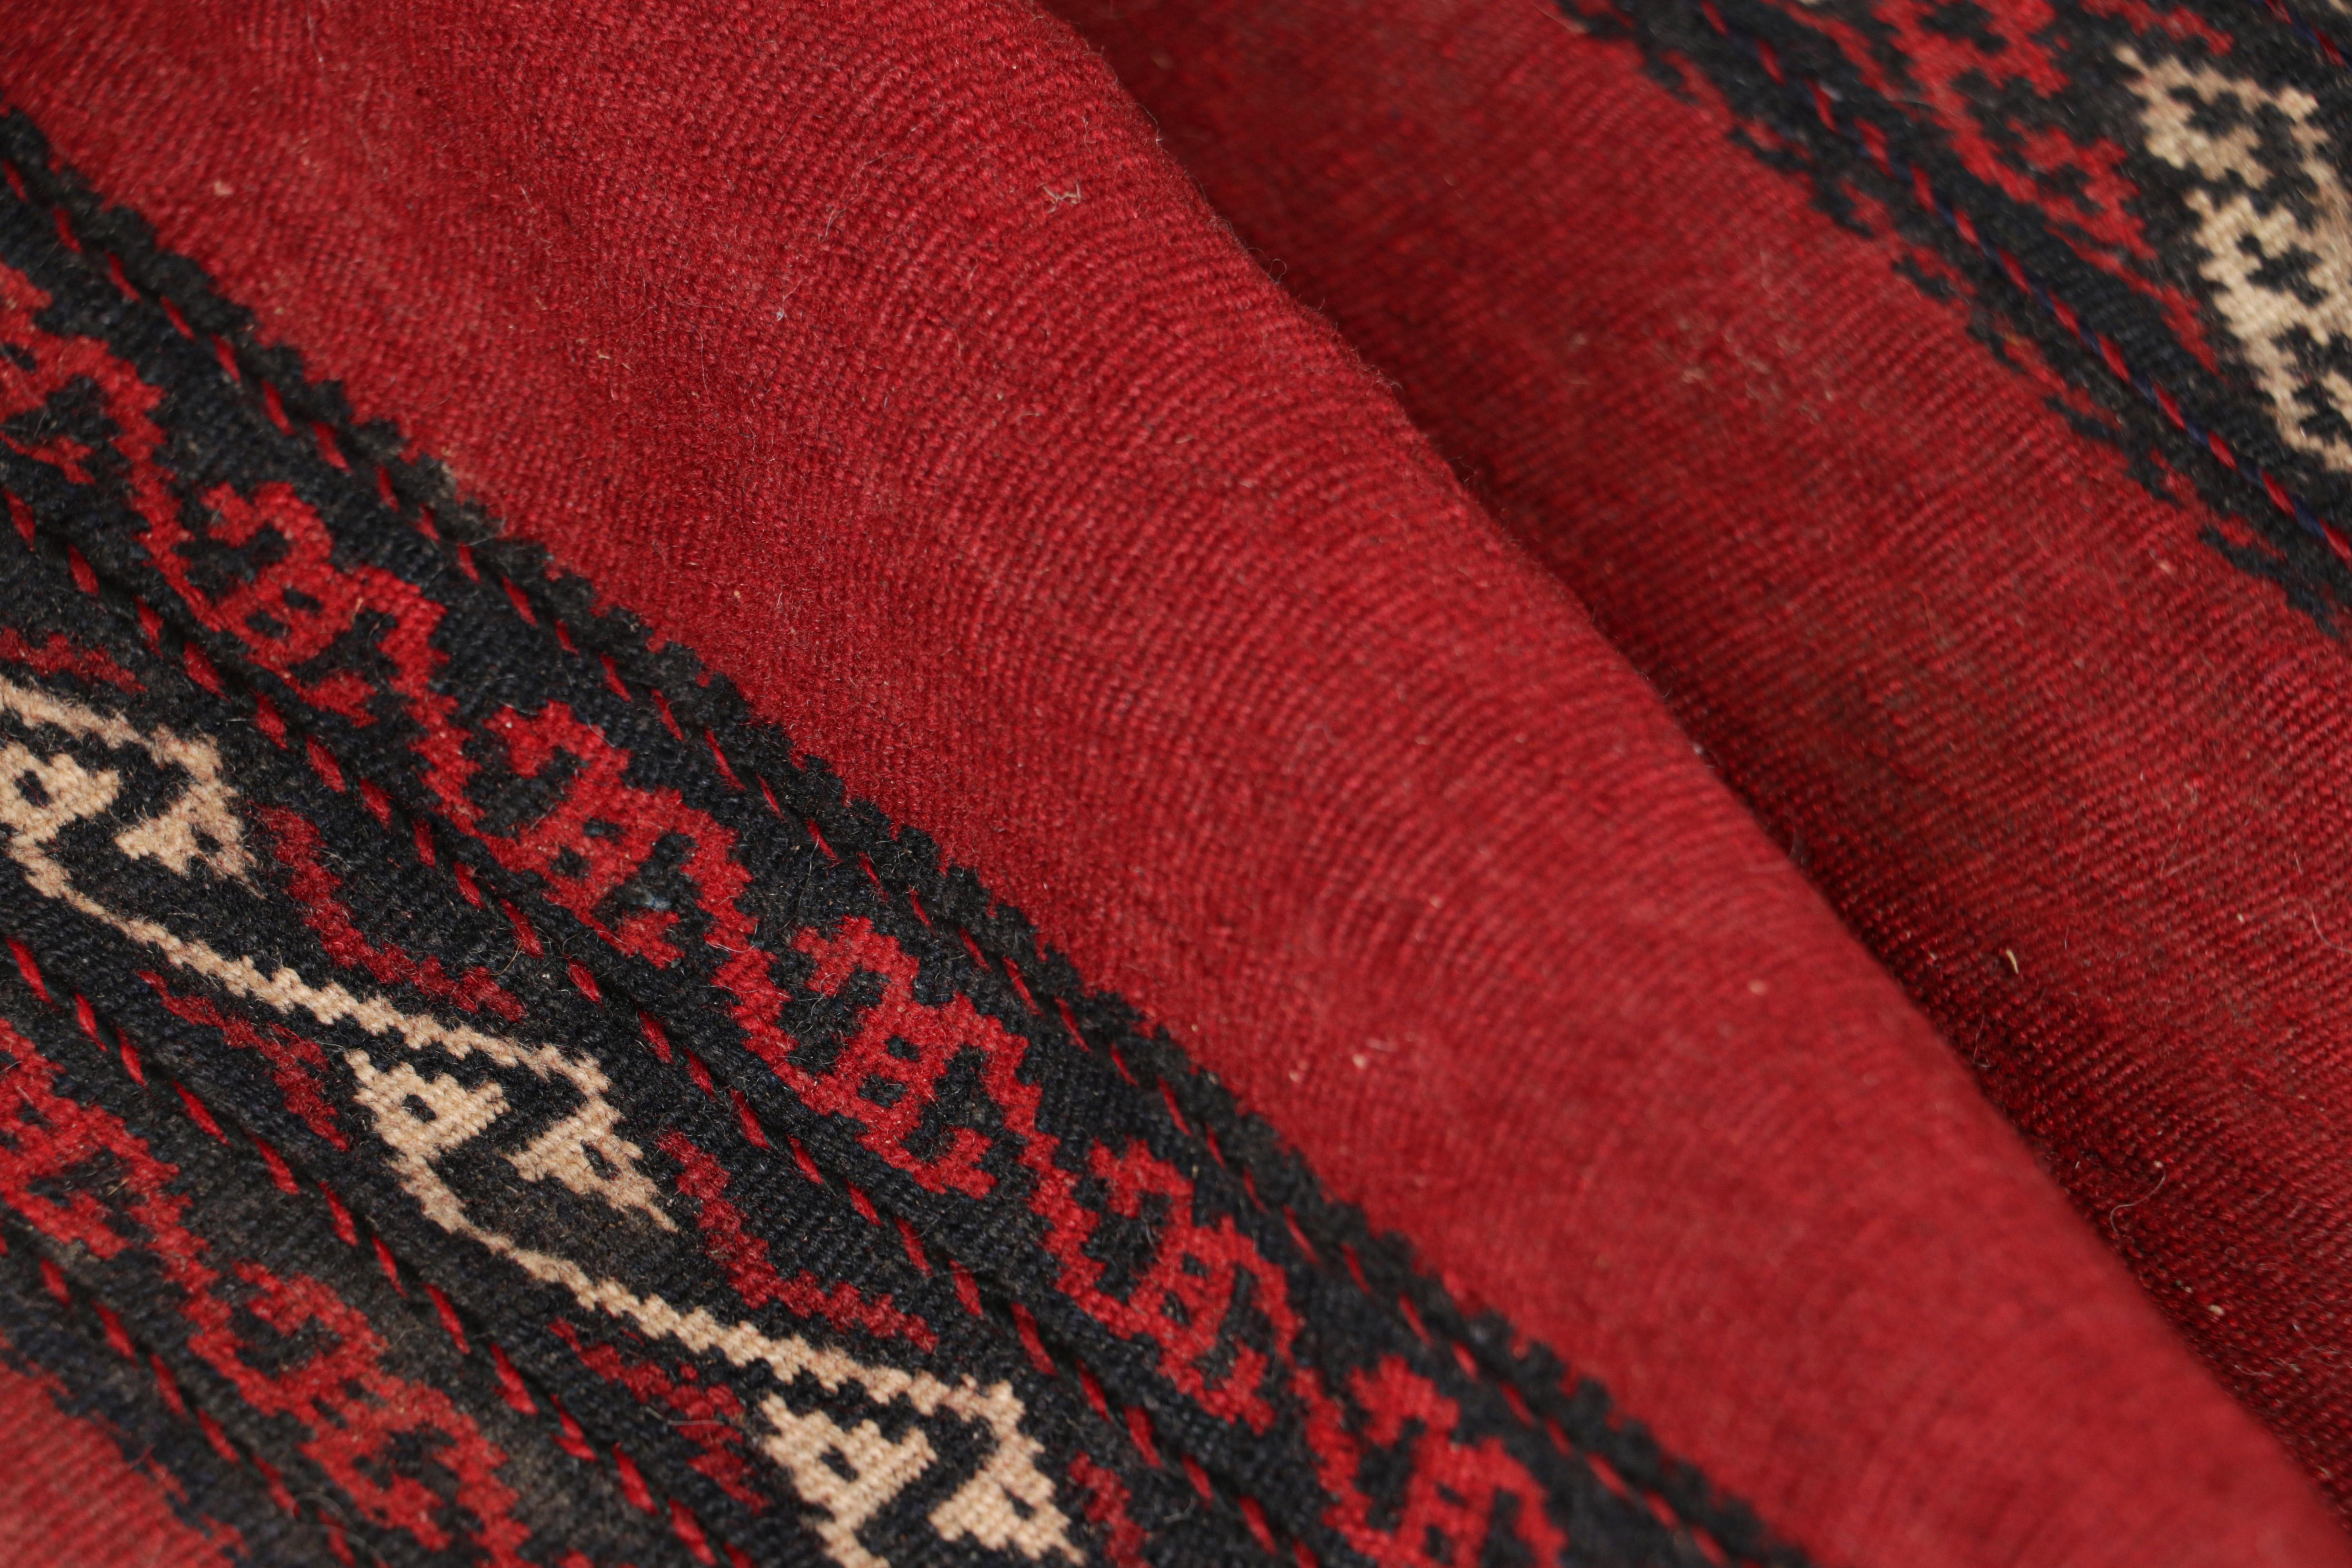 Mid-20th Century Vintage Afghan Kilim in Red with Stripes & Geometric Patterns, from Rug & Kilim For Sale